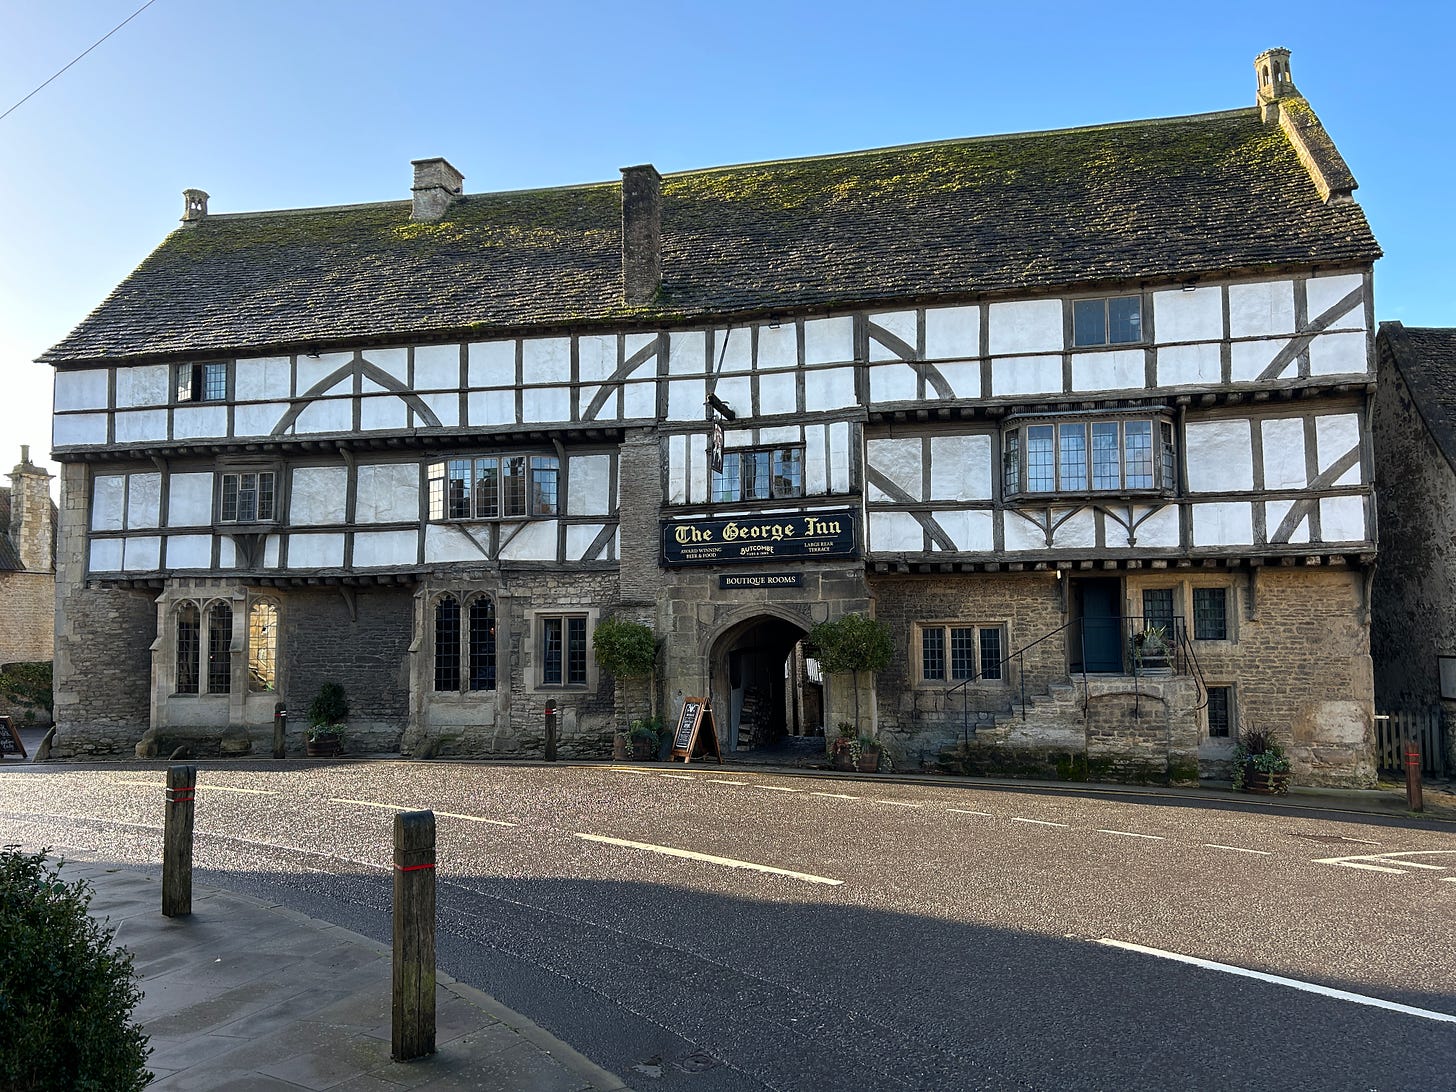 The George Inn, Norton St. Philip. It was here that, in 1685, the Duke of Monmouth set up headquarters. Later, Judge Jeffreys tried and found guilty, 12 men to be hanged. Image: Roland’s Travels